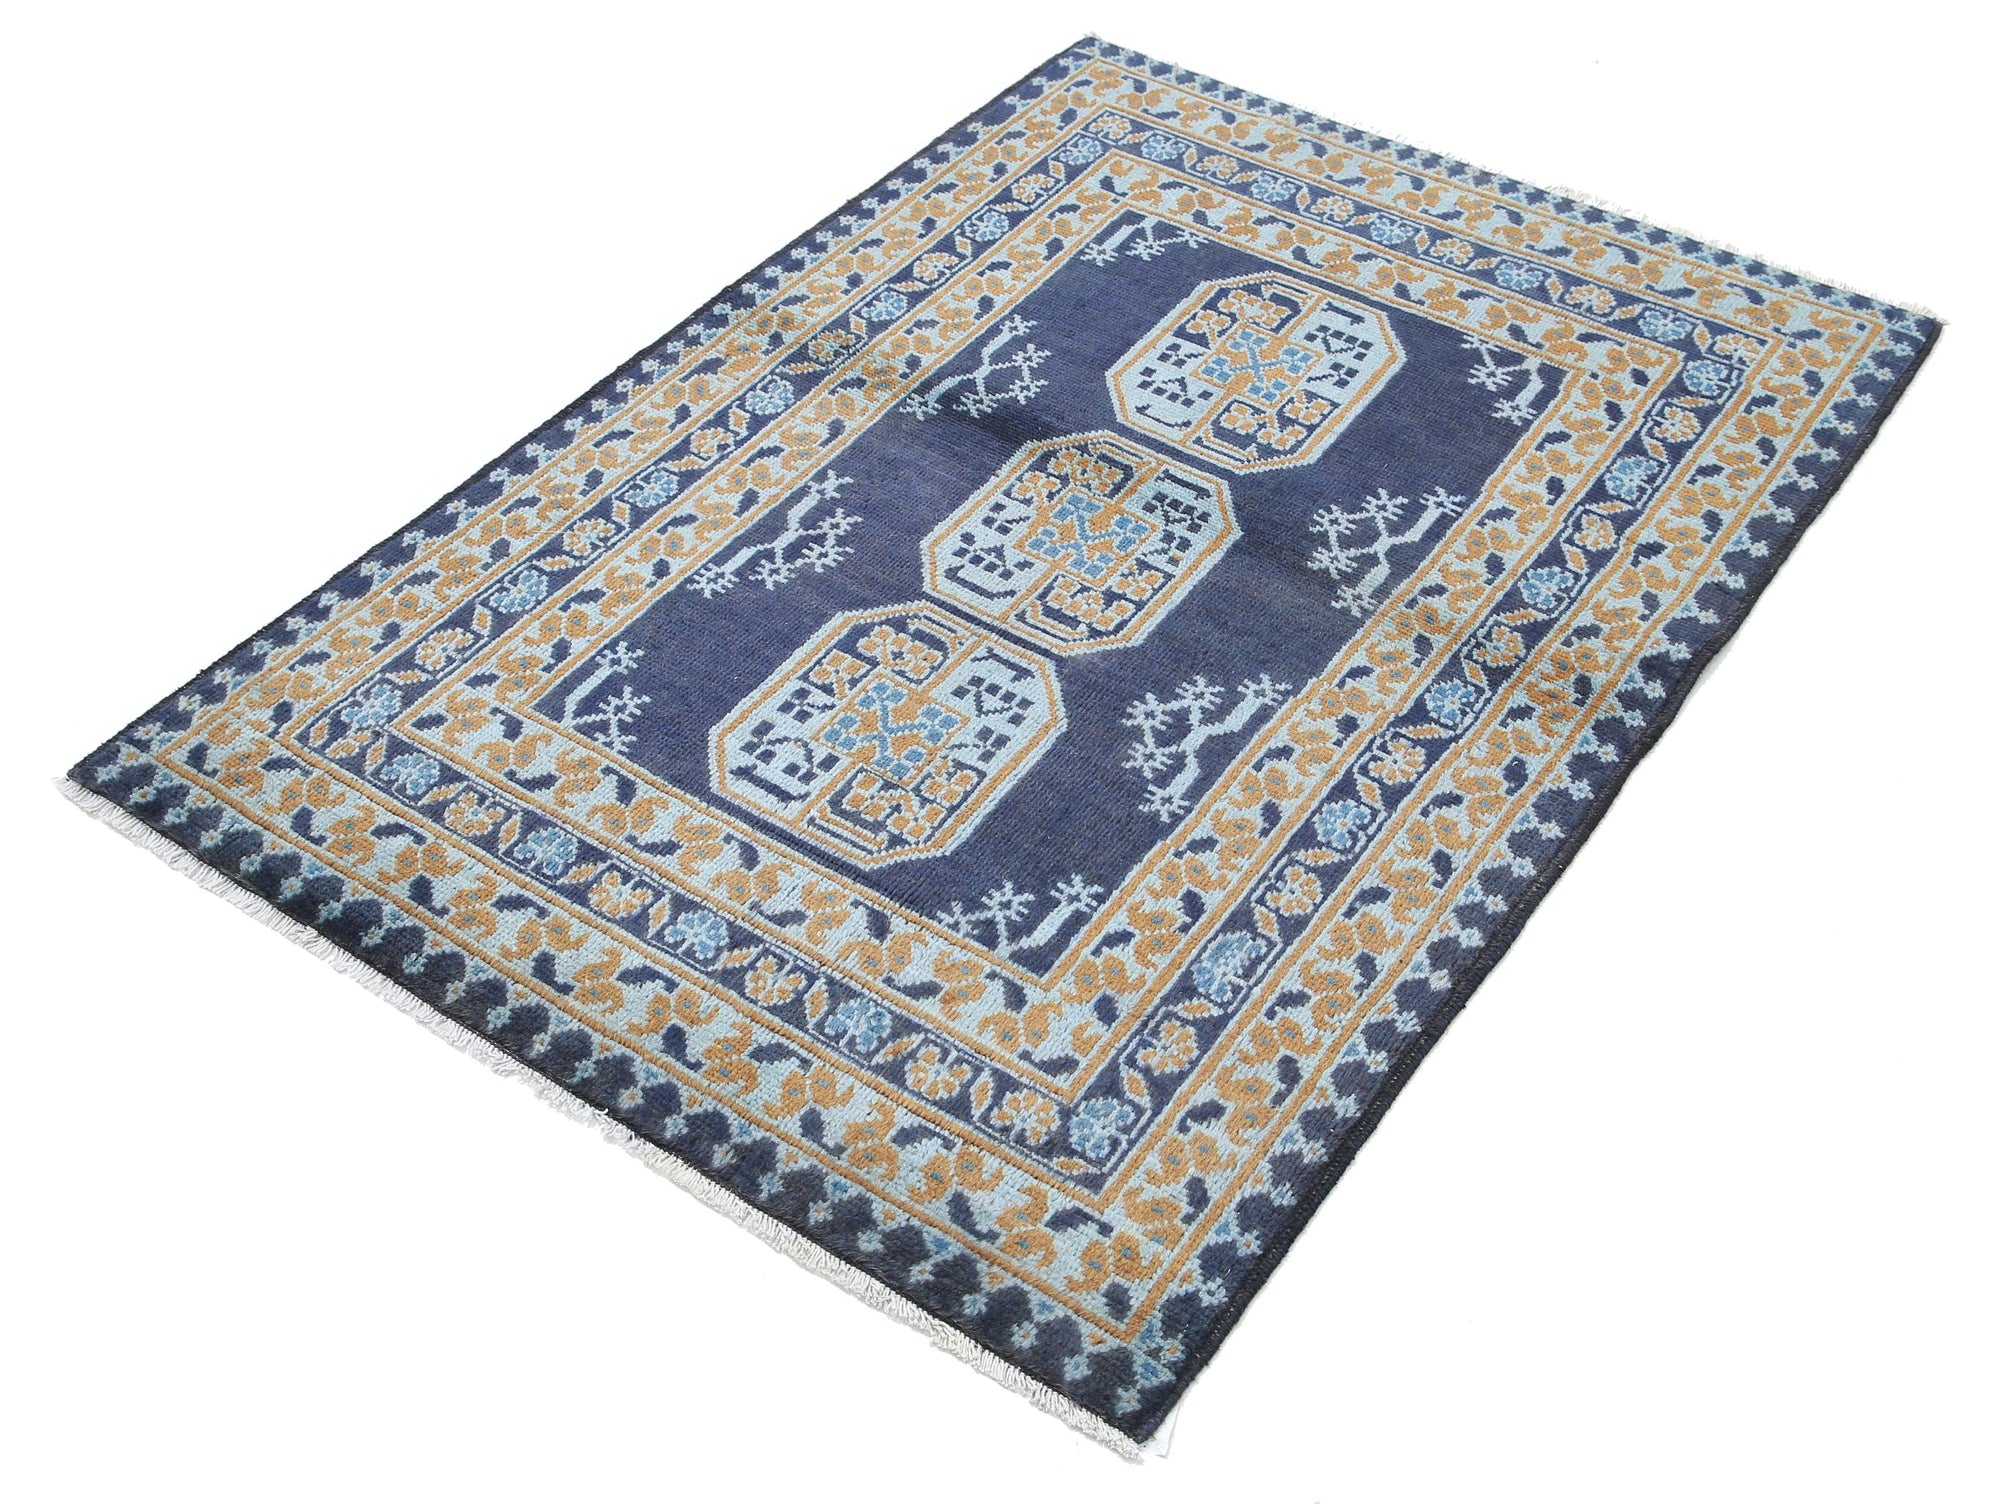 Revival-hand-knotted-gul-collection-wool-rug-5014101-2.jpg